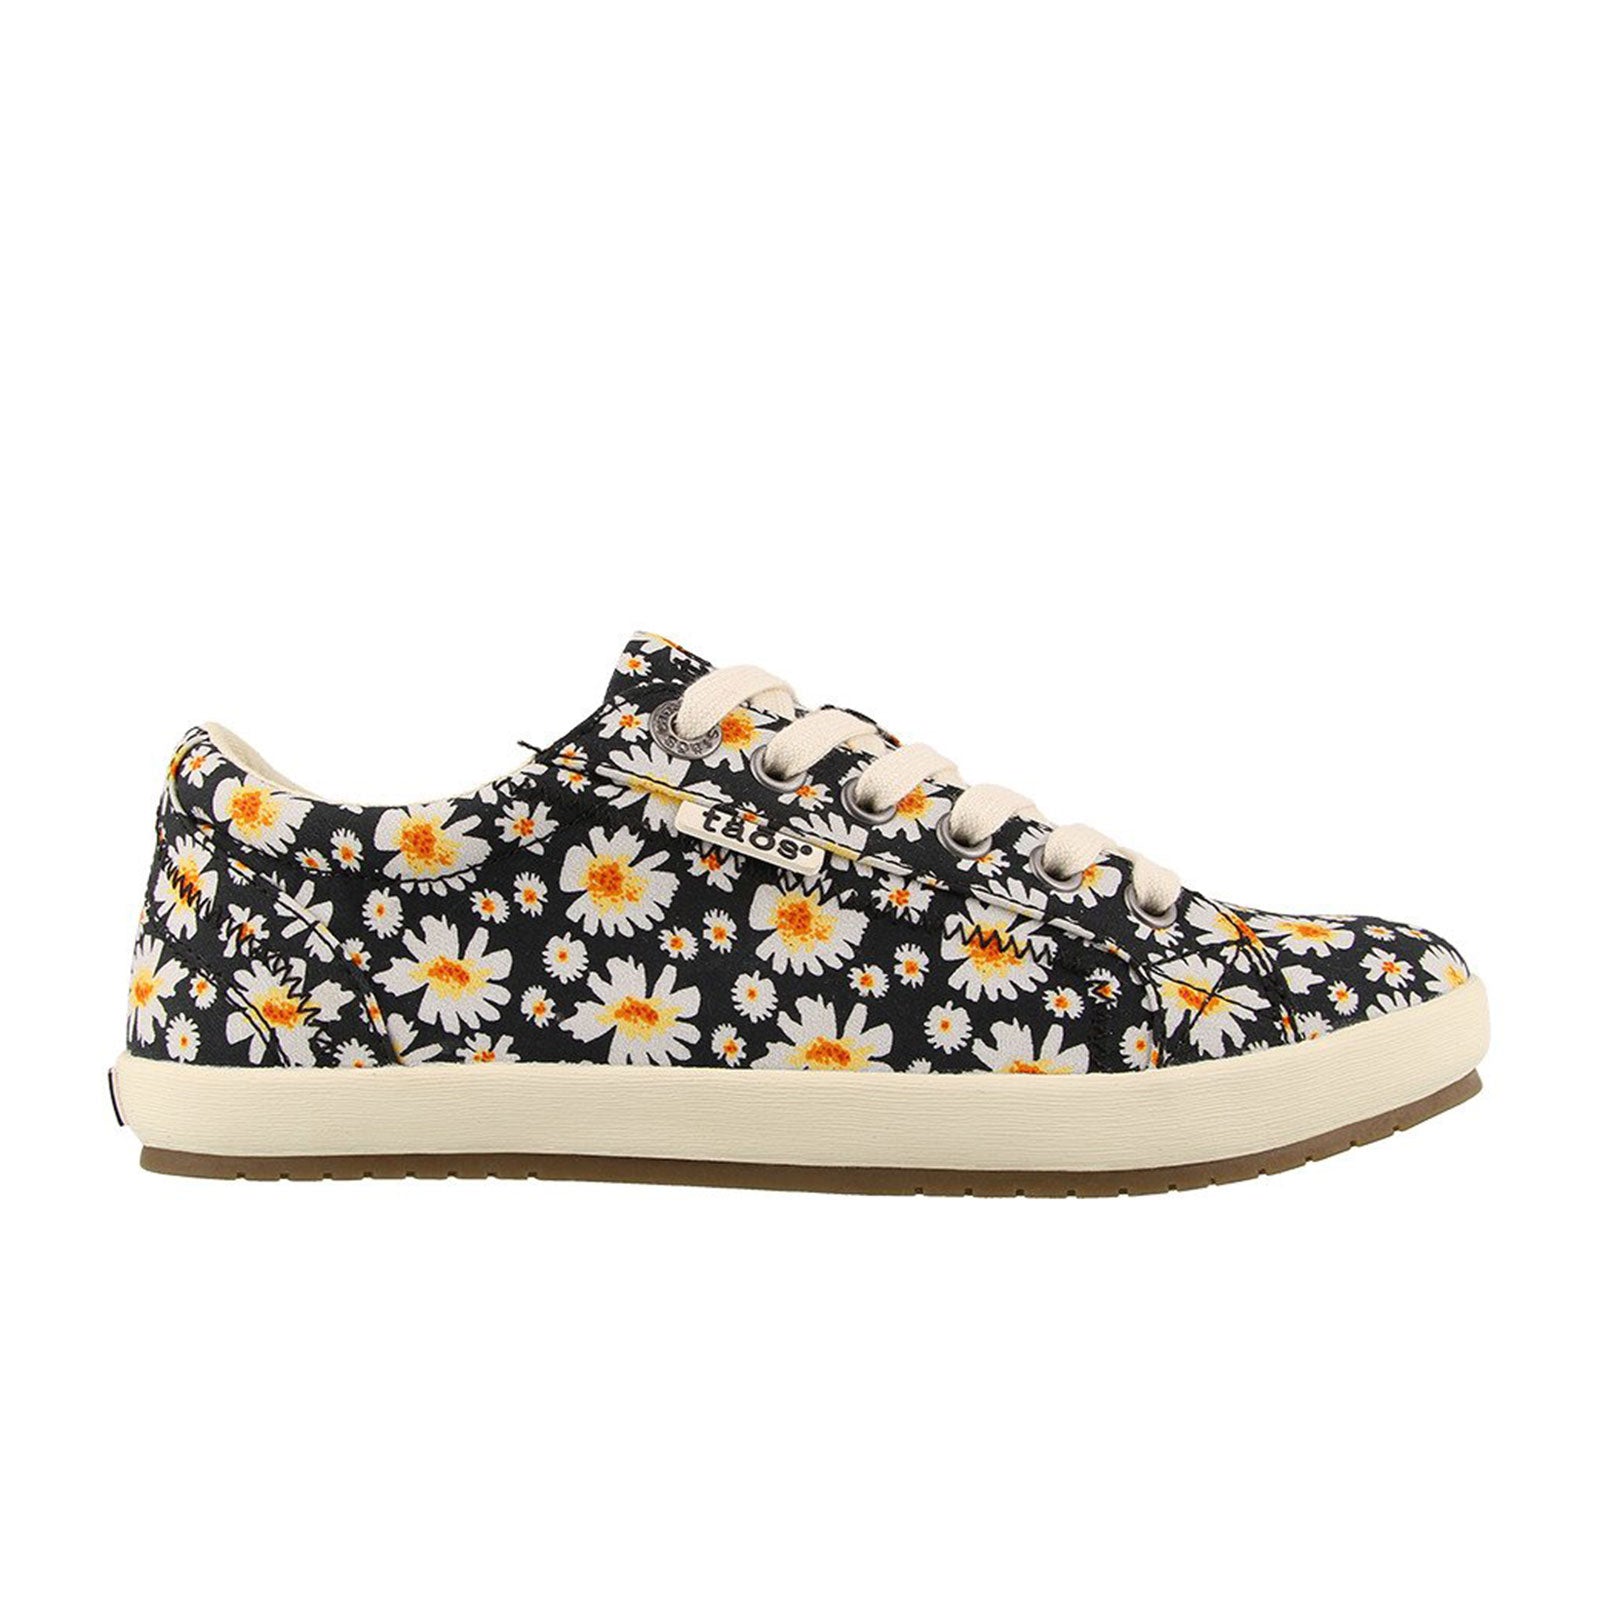 FAUSTO Floral Print Casual Outfit Fashion Comfort Lighweight Lace Up Shoes  Sneakers For Women - Buy FAUSTO Floral Print Casual Outfit Fashion Comfort  Lighweight Lace Up Shoes Sneakers For Women Online at